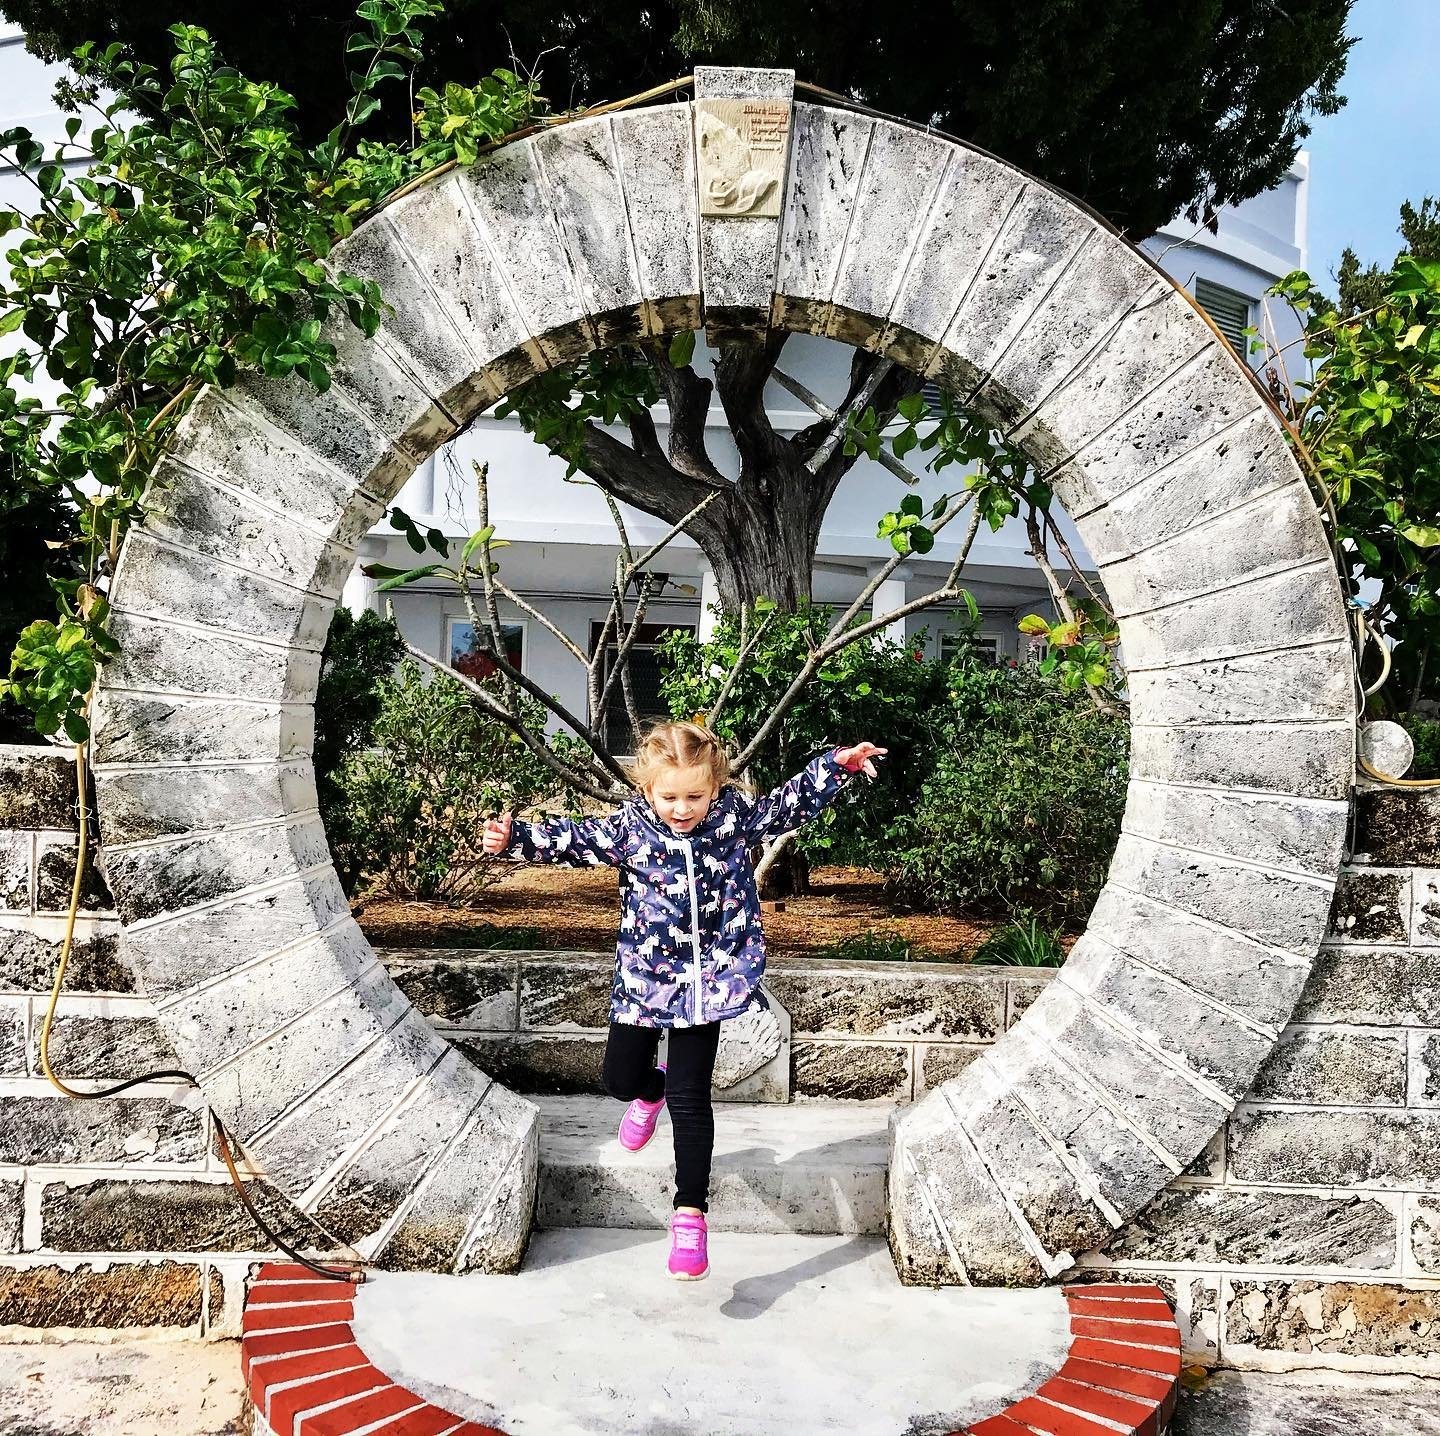 A little girl playing by a stone archway